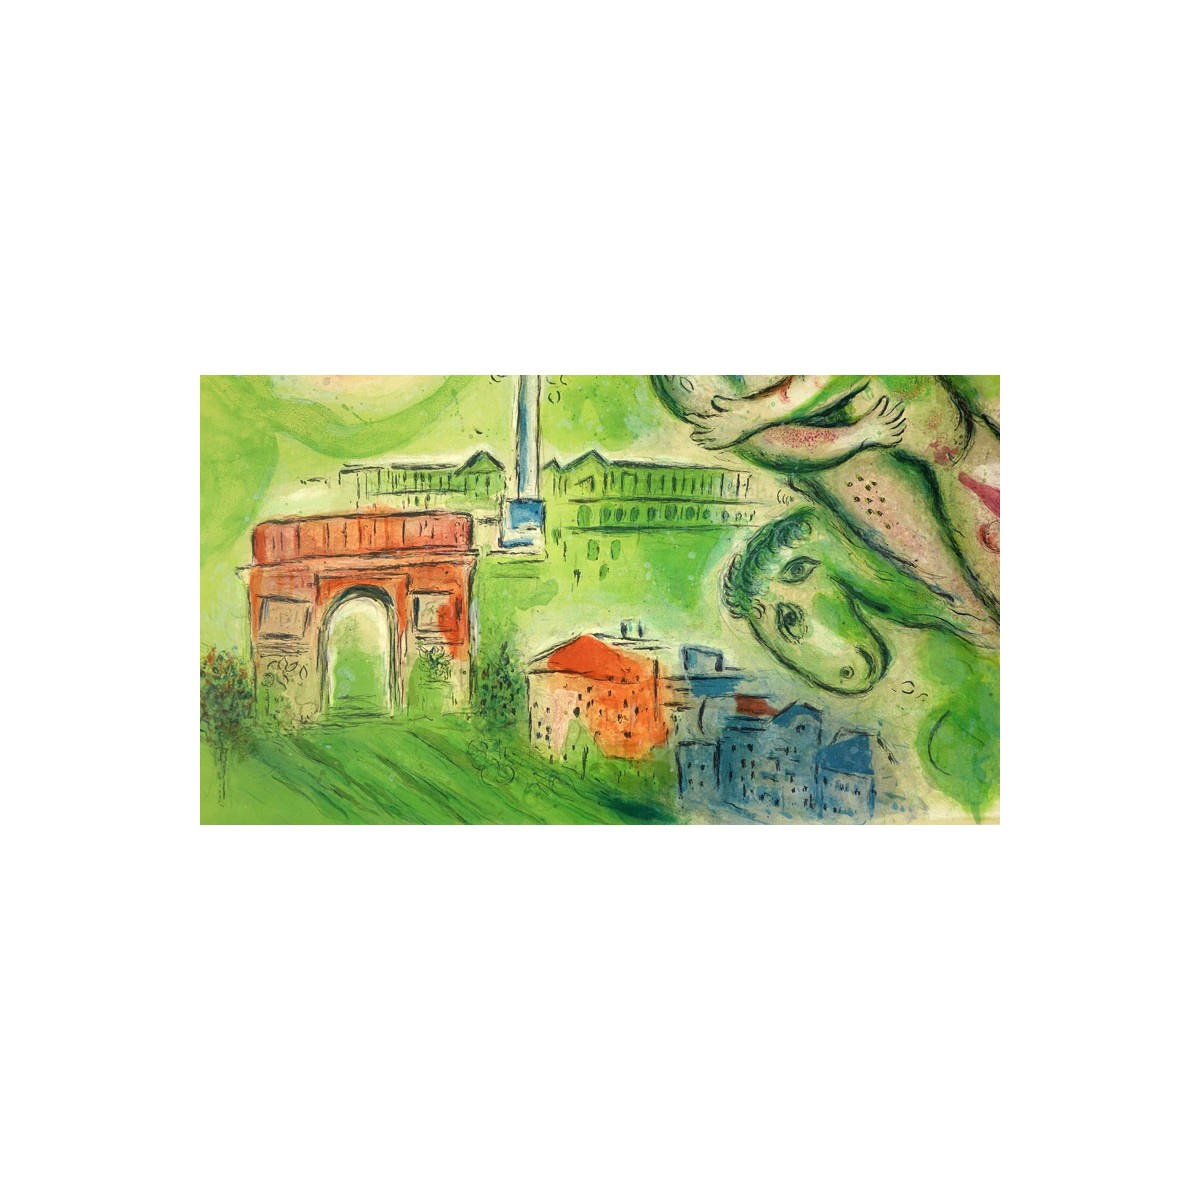 After: Marc Chagall, French/Russian (1887 - 1985) "Paris, L'Opera